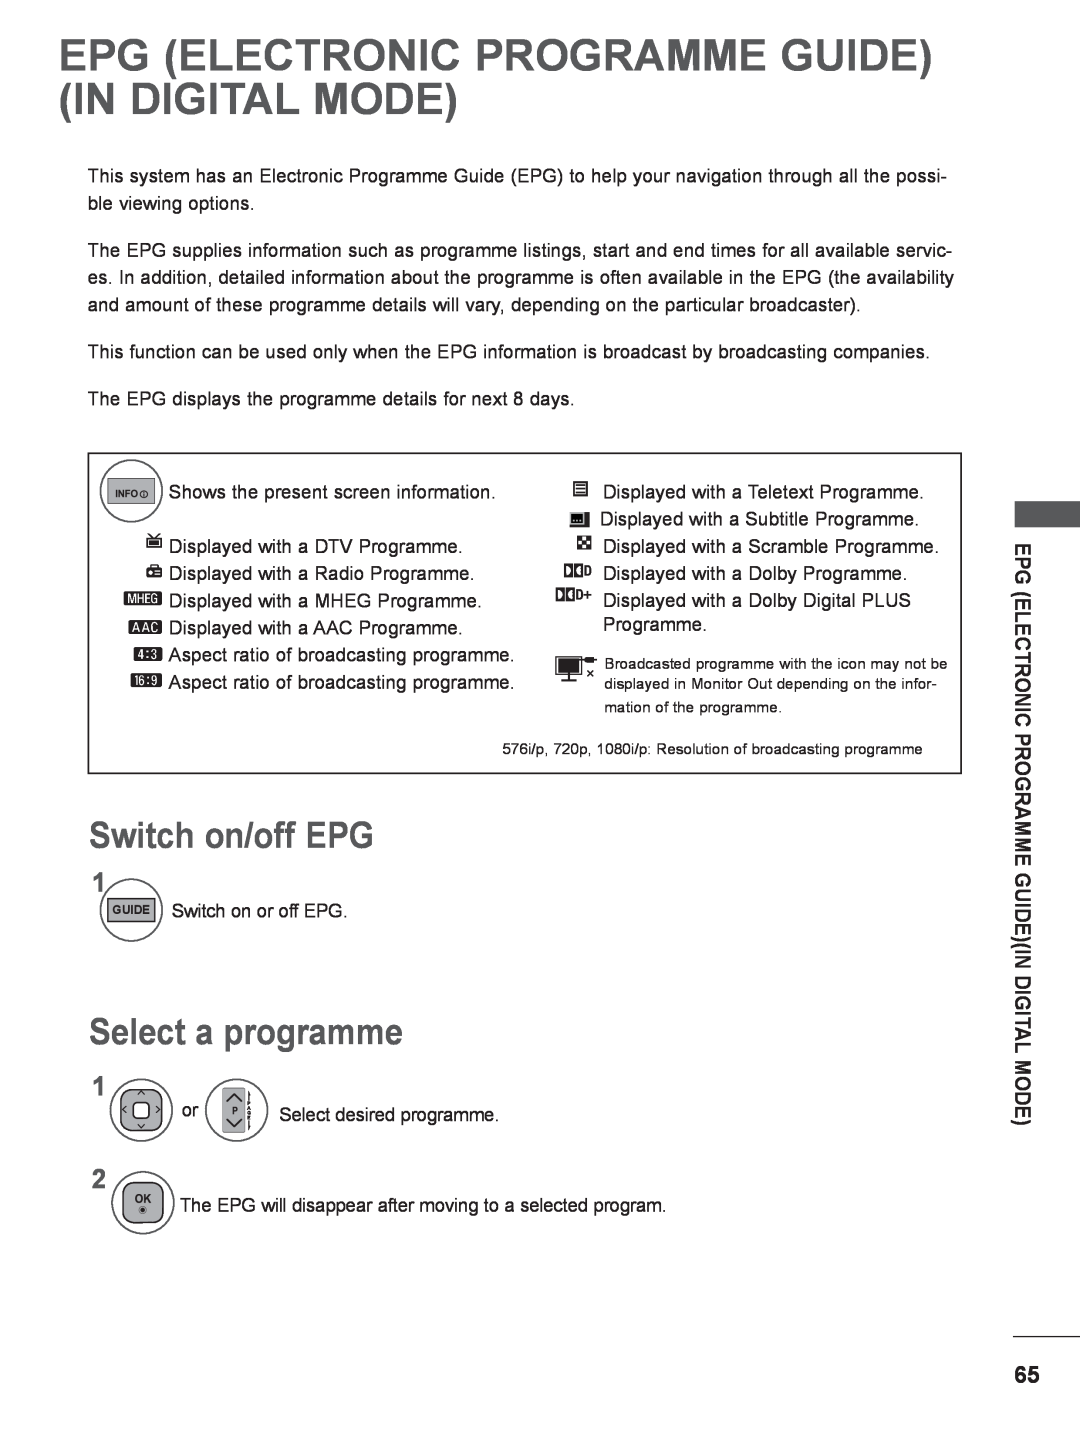 LG Electronics M2380D, M2780DF Epg Electronic Programme Guide In Digital Mode, Switch on/off EPG, Select a programme 